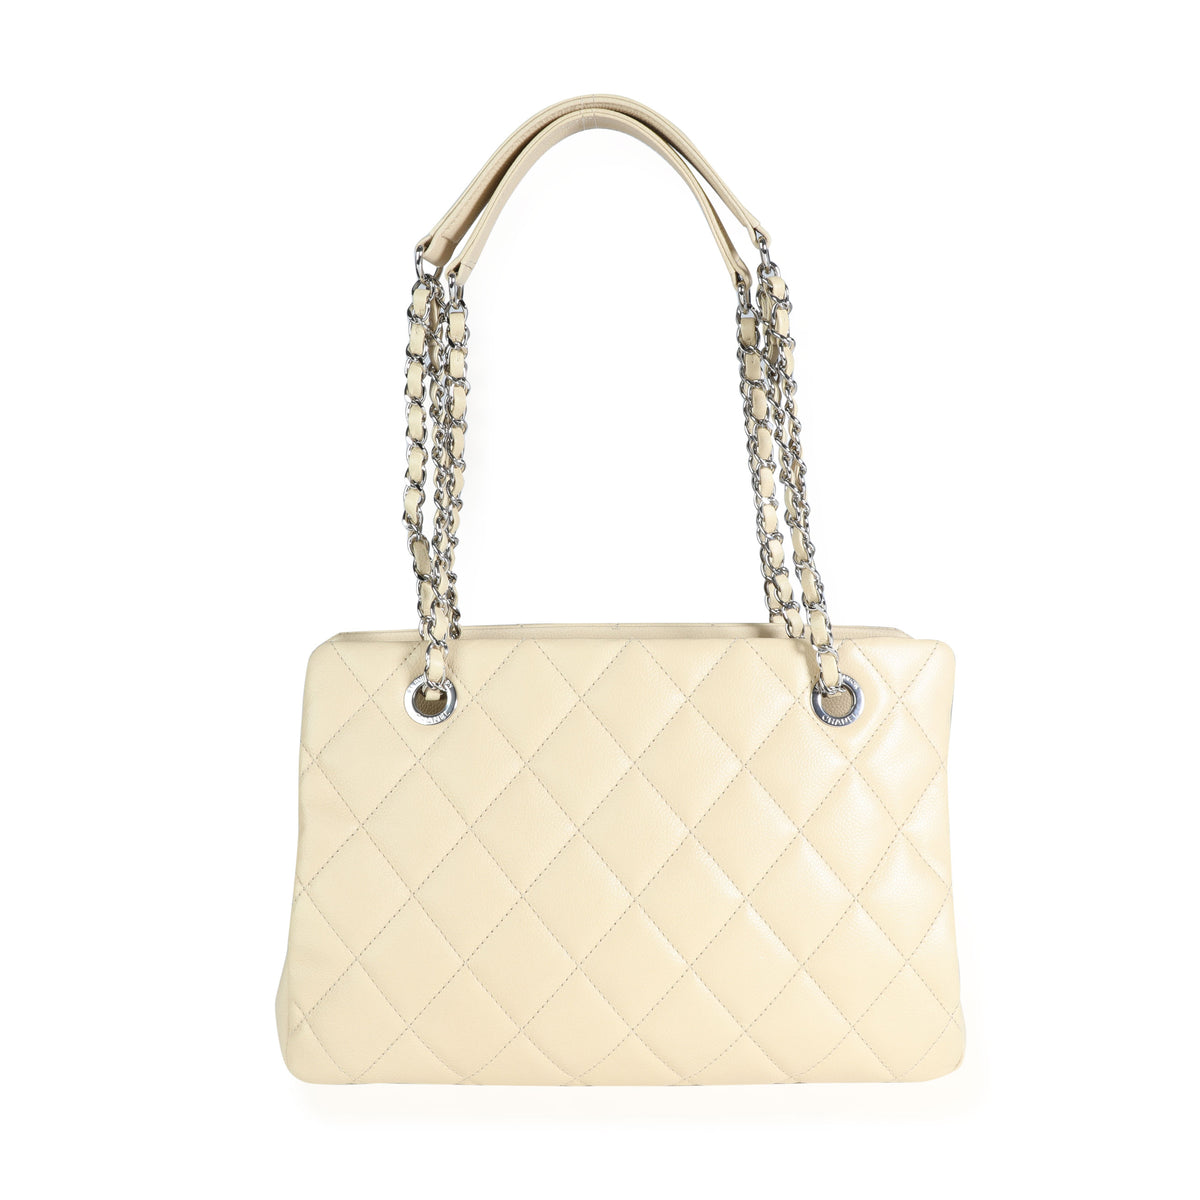 Chanel Light Beige Quilted Caviar Petite Timeless Tote, myGemma, DE